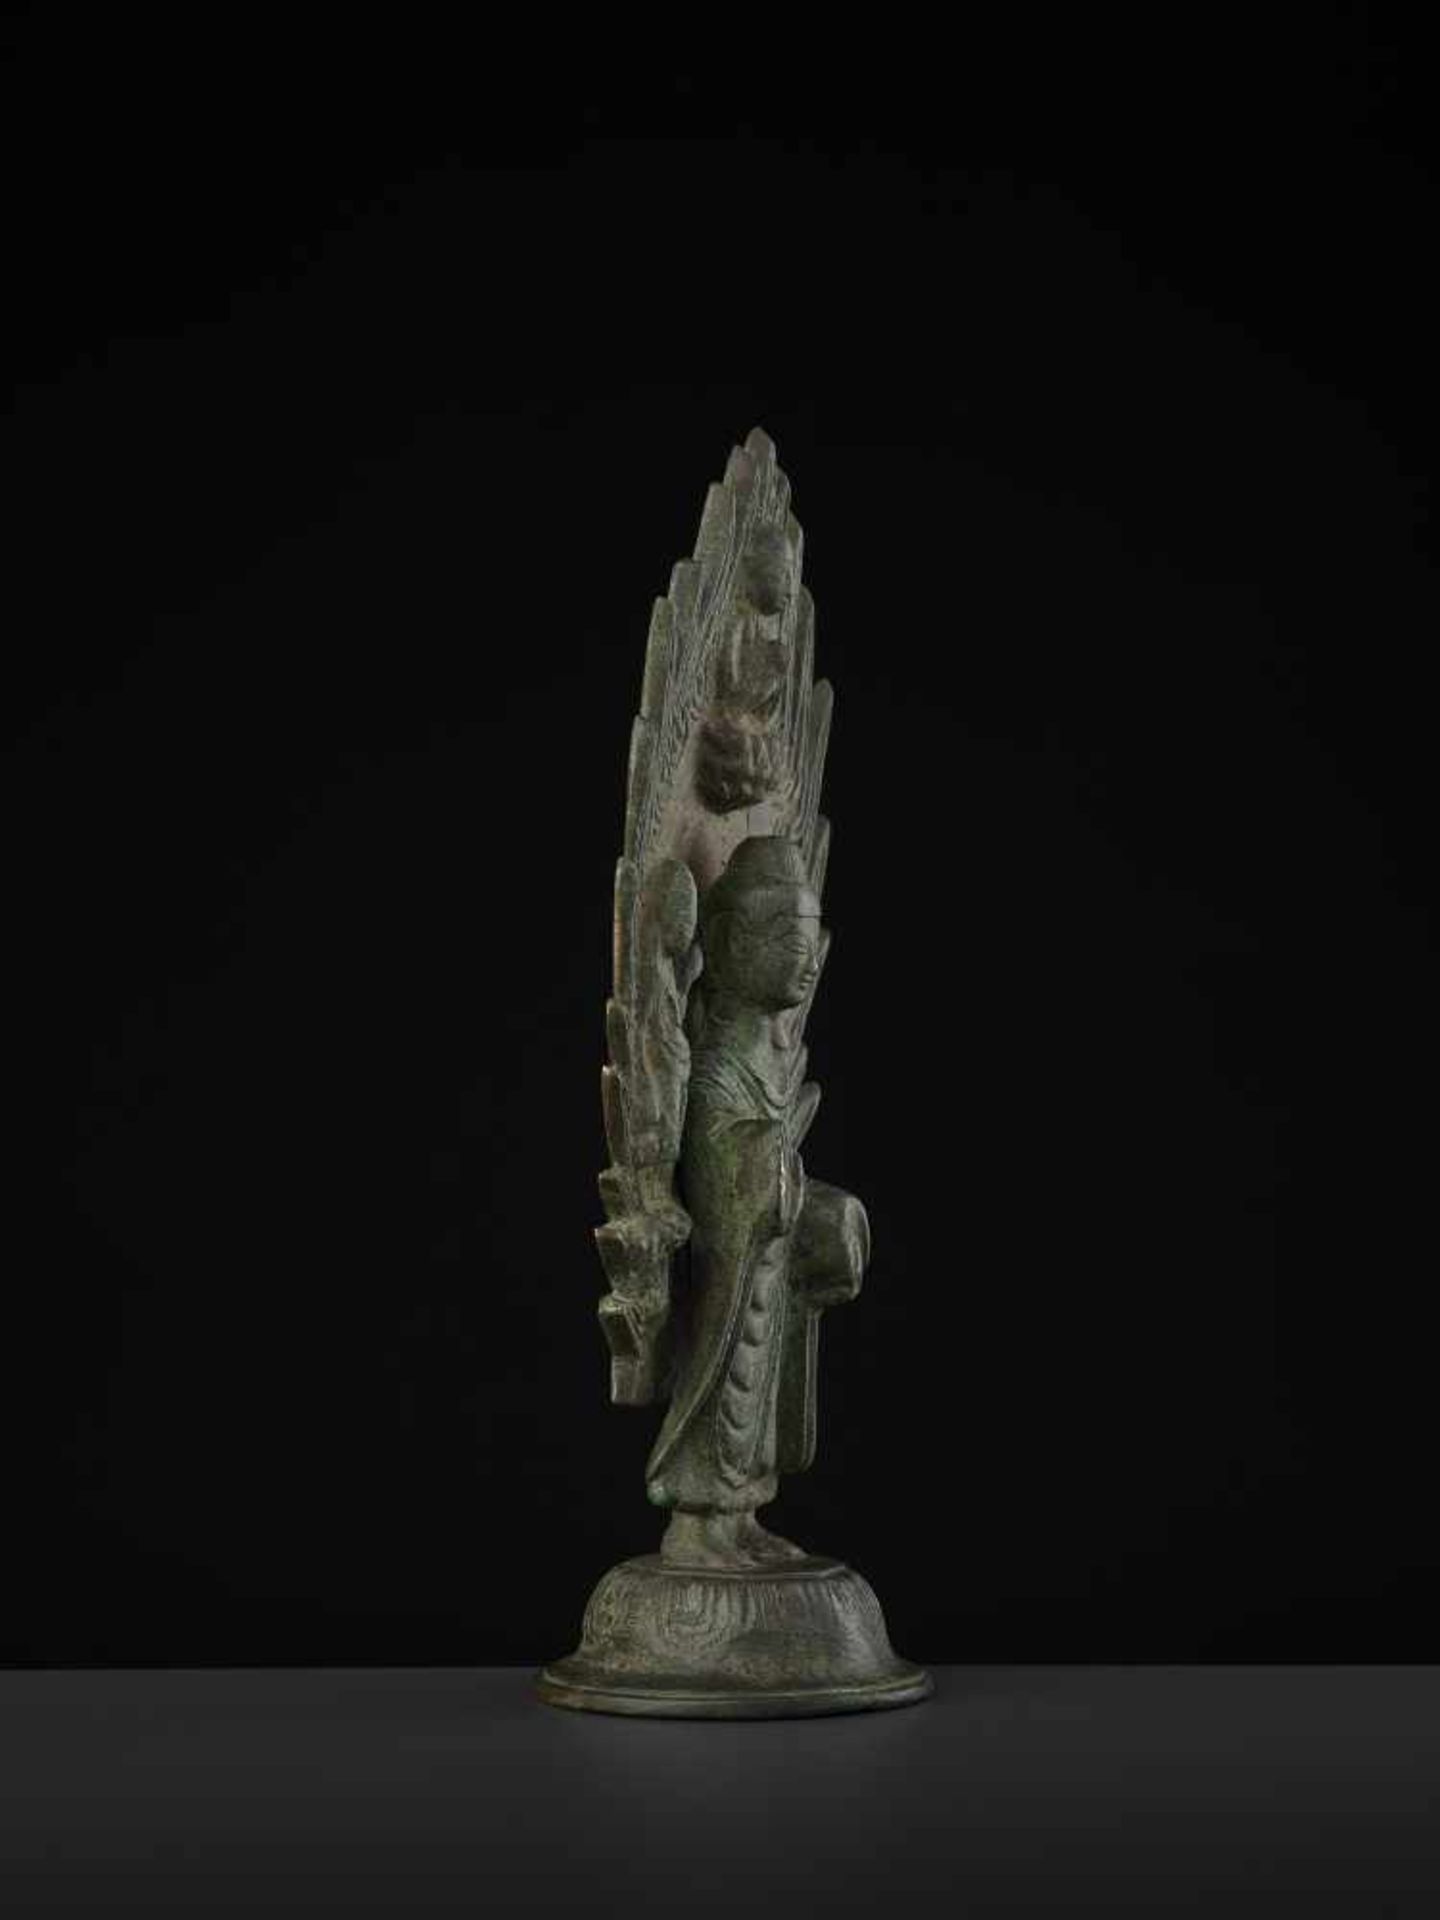 A BRONZE BUDDHA DATED 571 China, Northern Qi dynasty. Cast and incised bronze with a rich, - Image 7 of 11